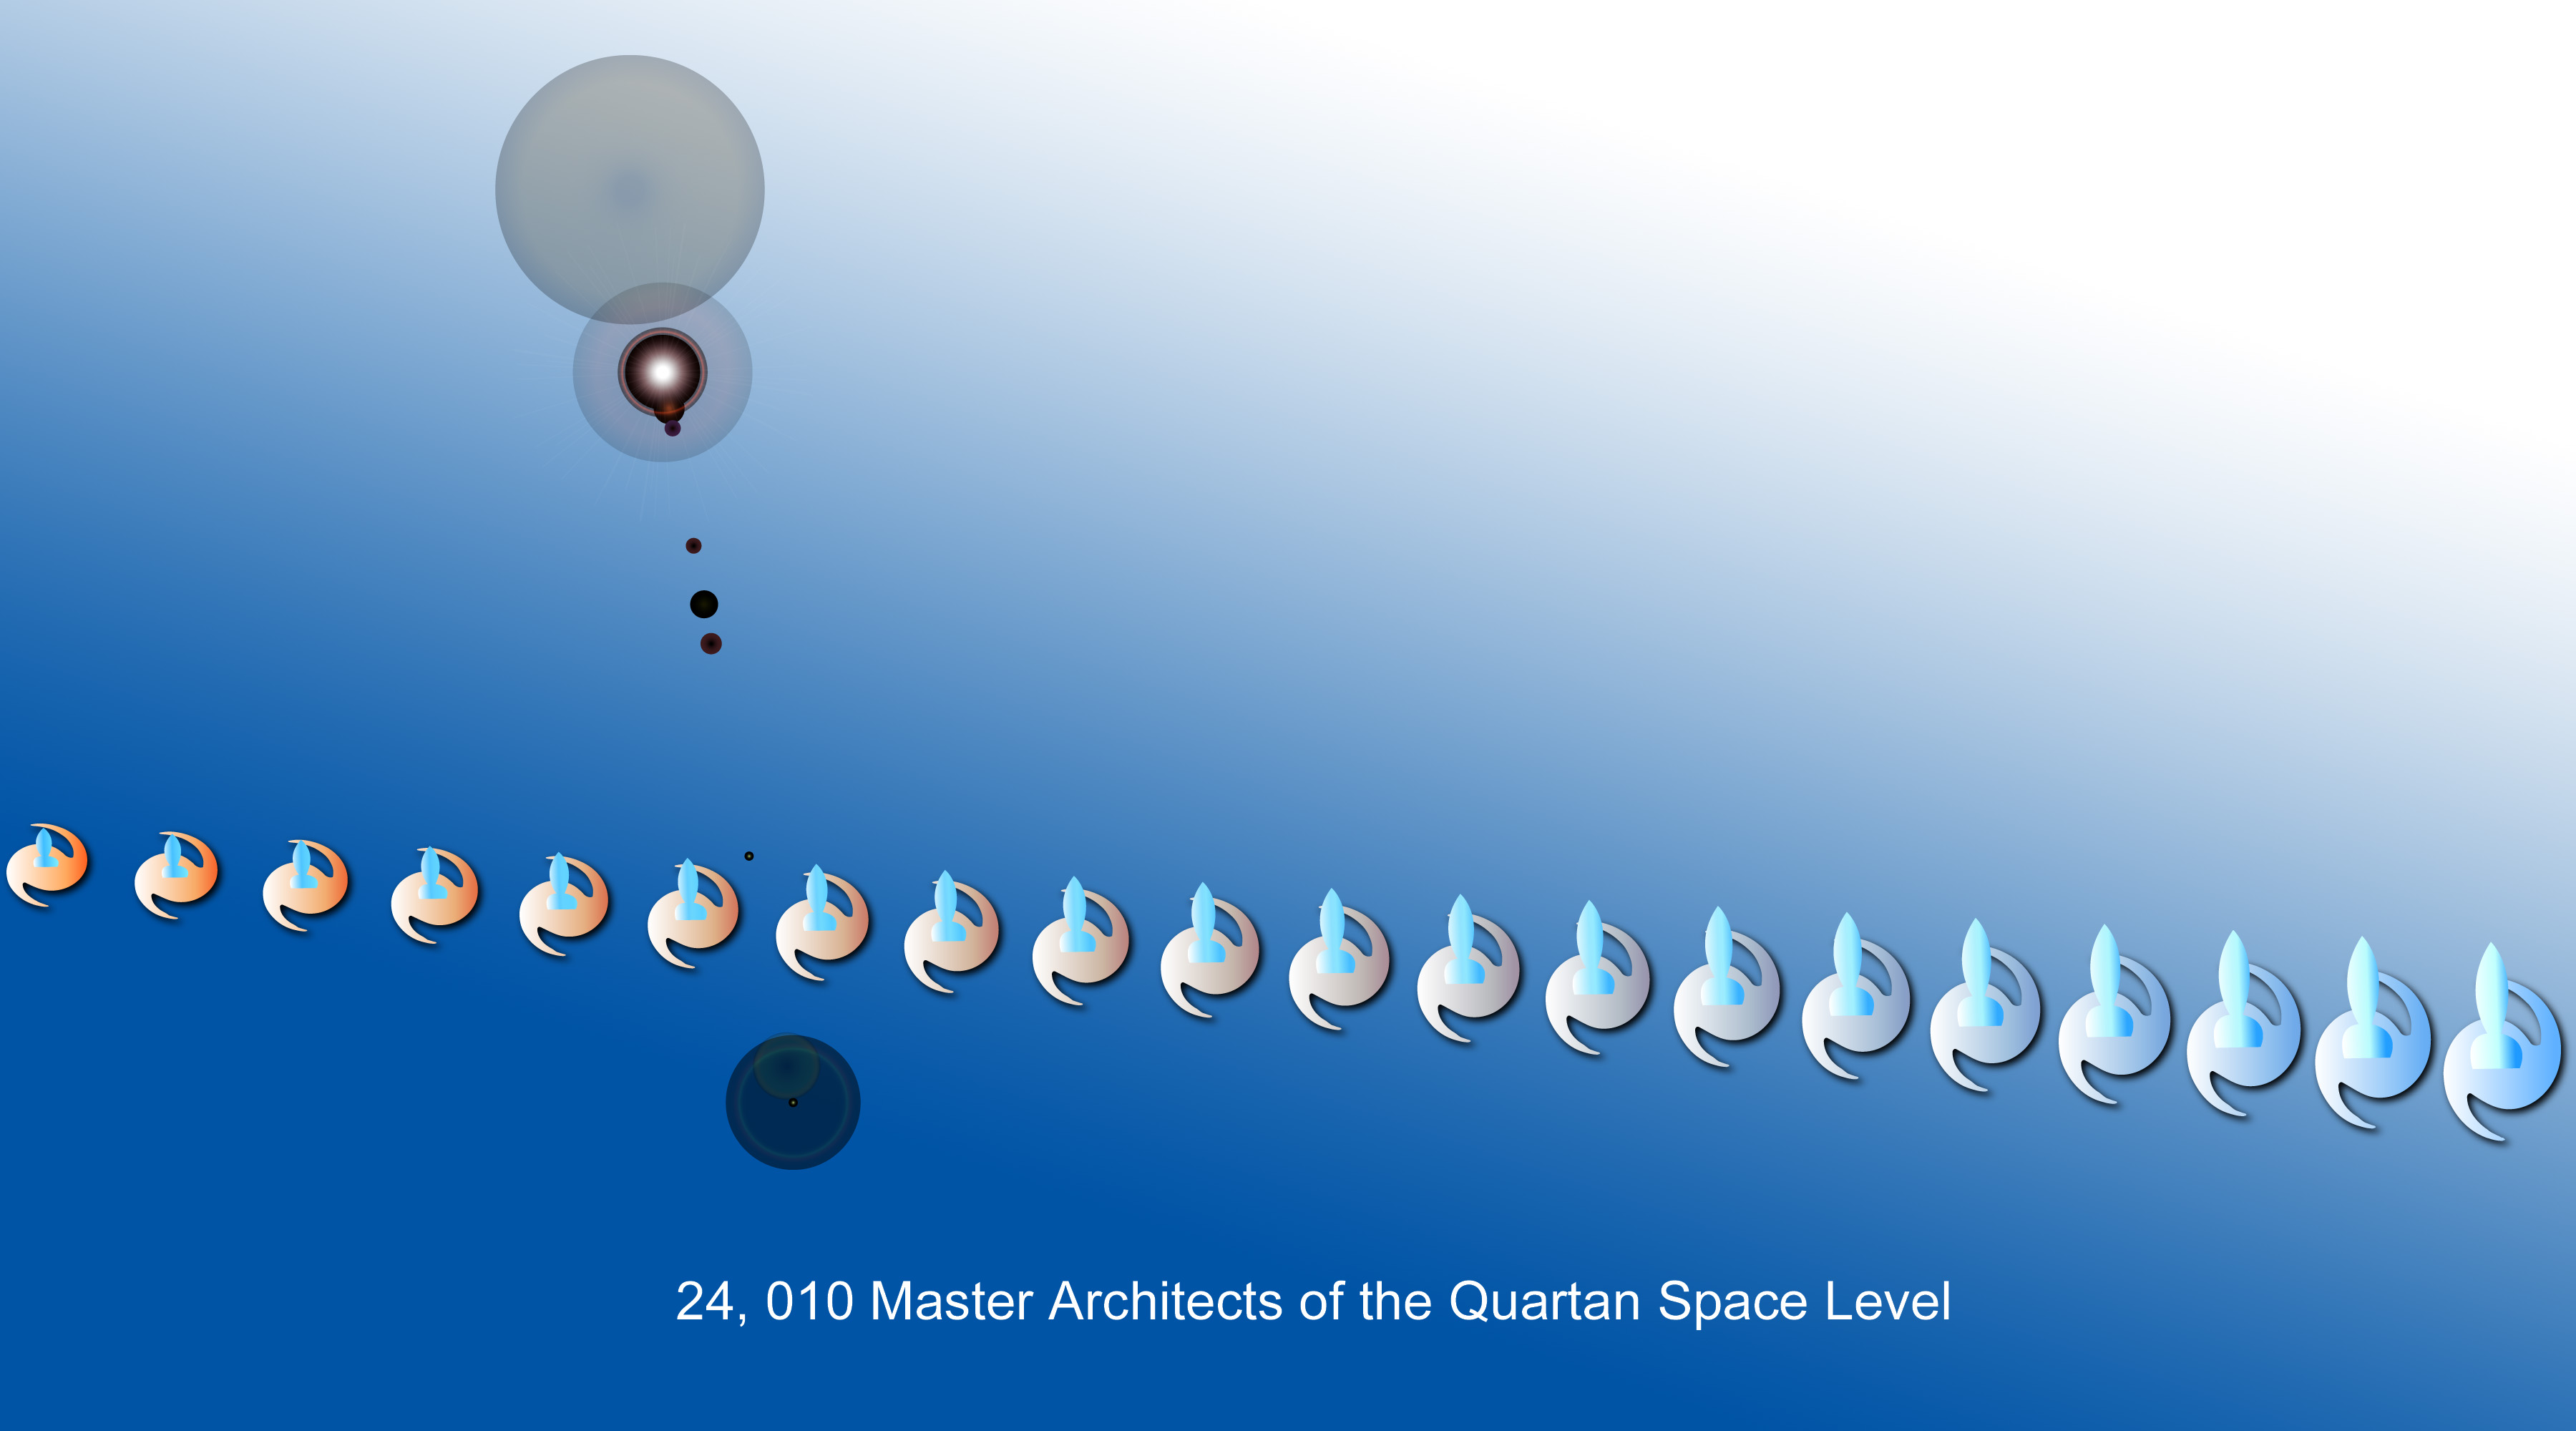 The Quartan Space Level.  This, the final and largest corps, 
consists of 24,010 Master Architects